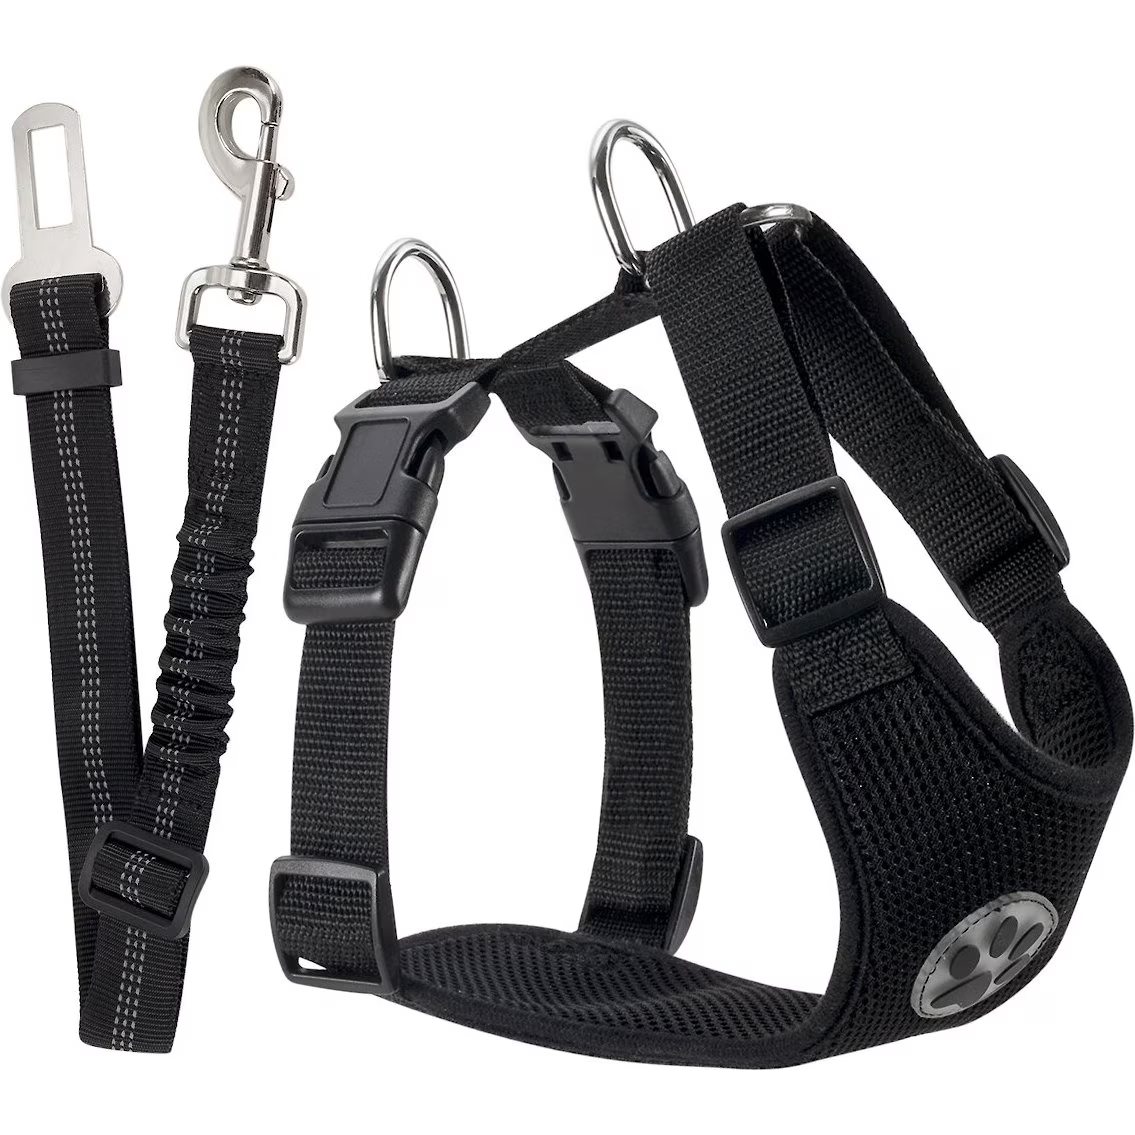 SlowTon Car Safety Dog Harness With Seat Belt